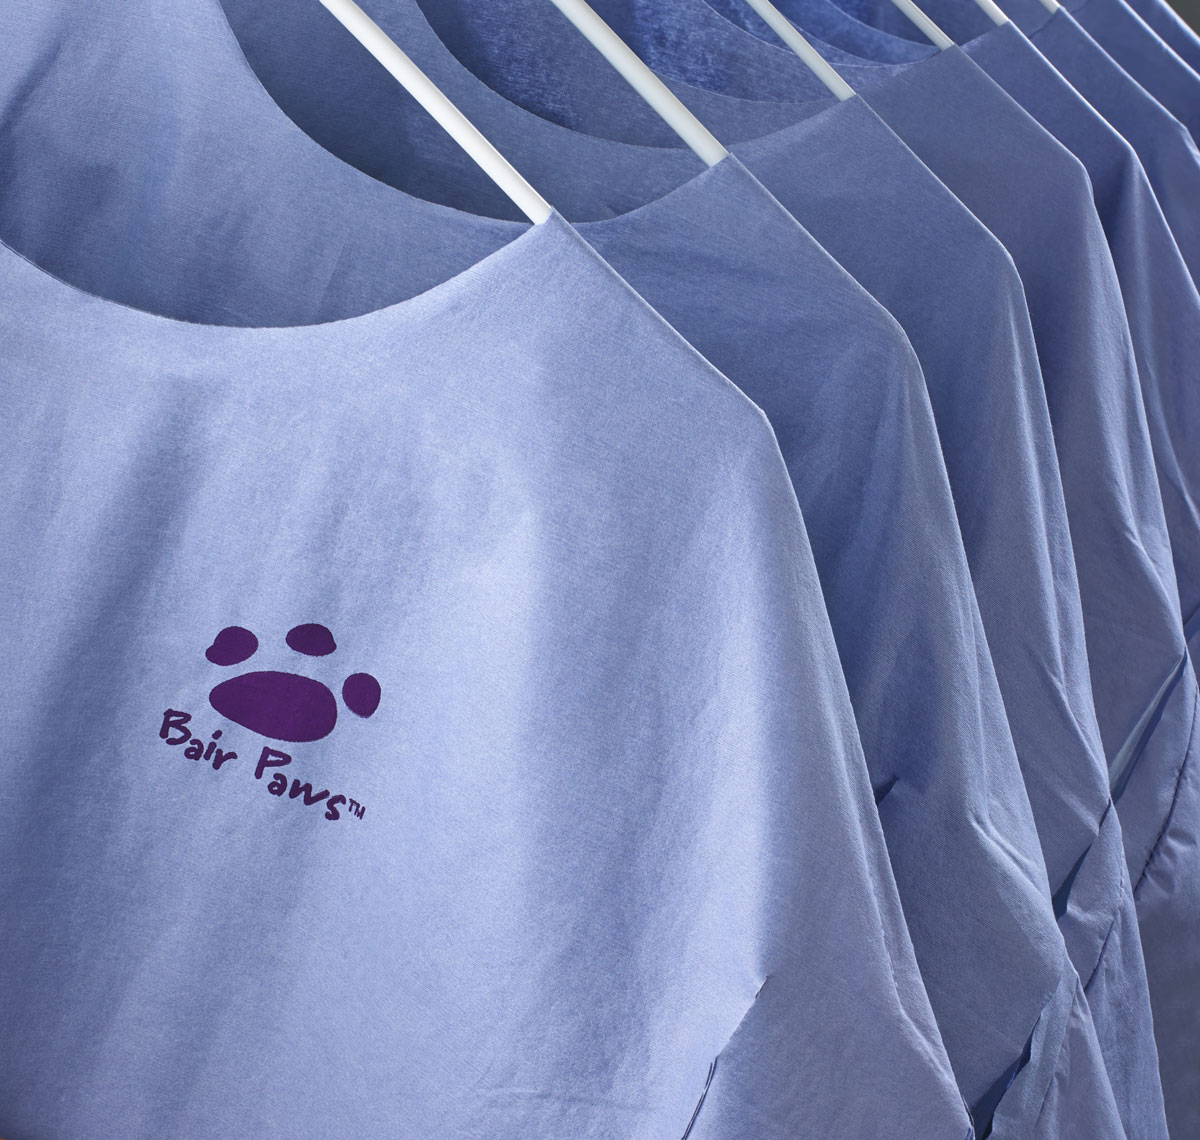 Bair Paws/patient gowns/hanging row/product photography